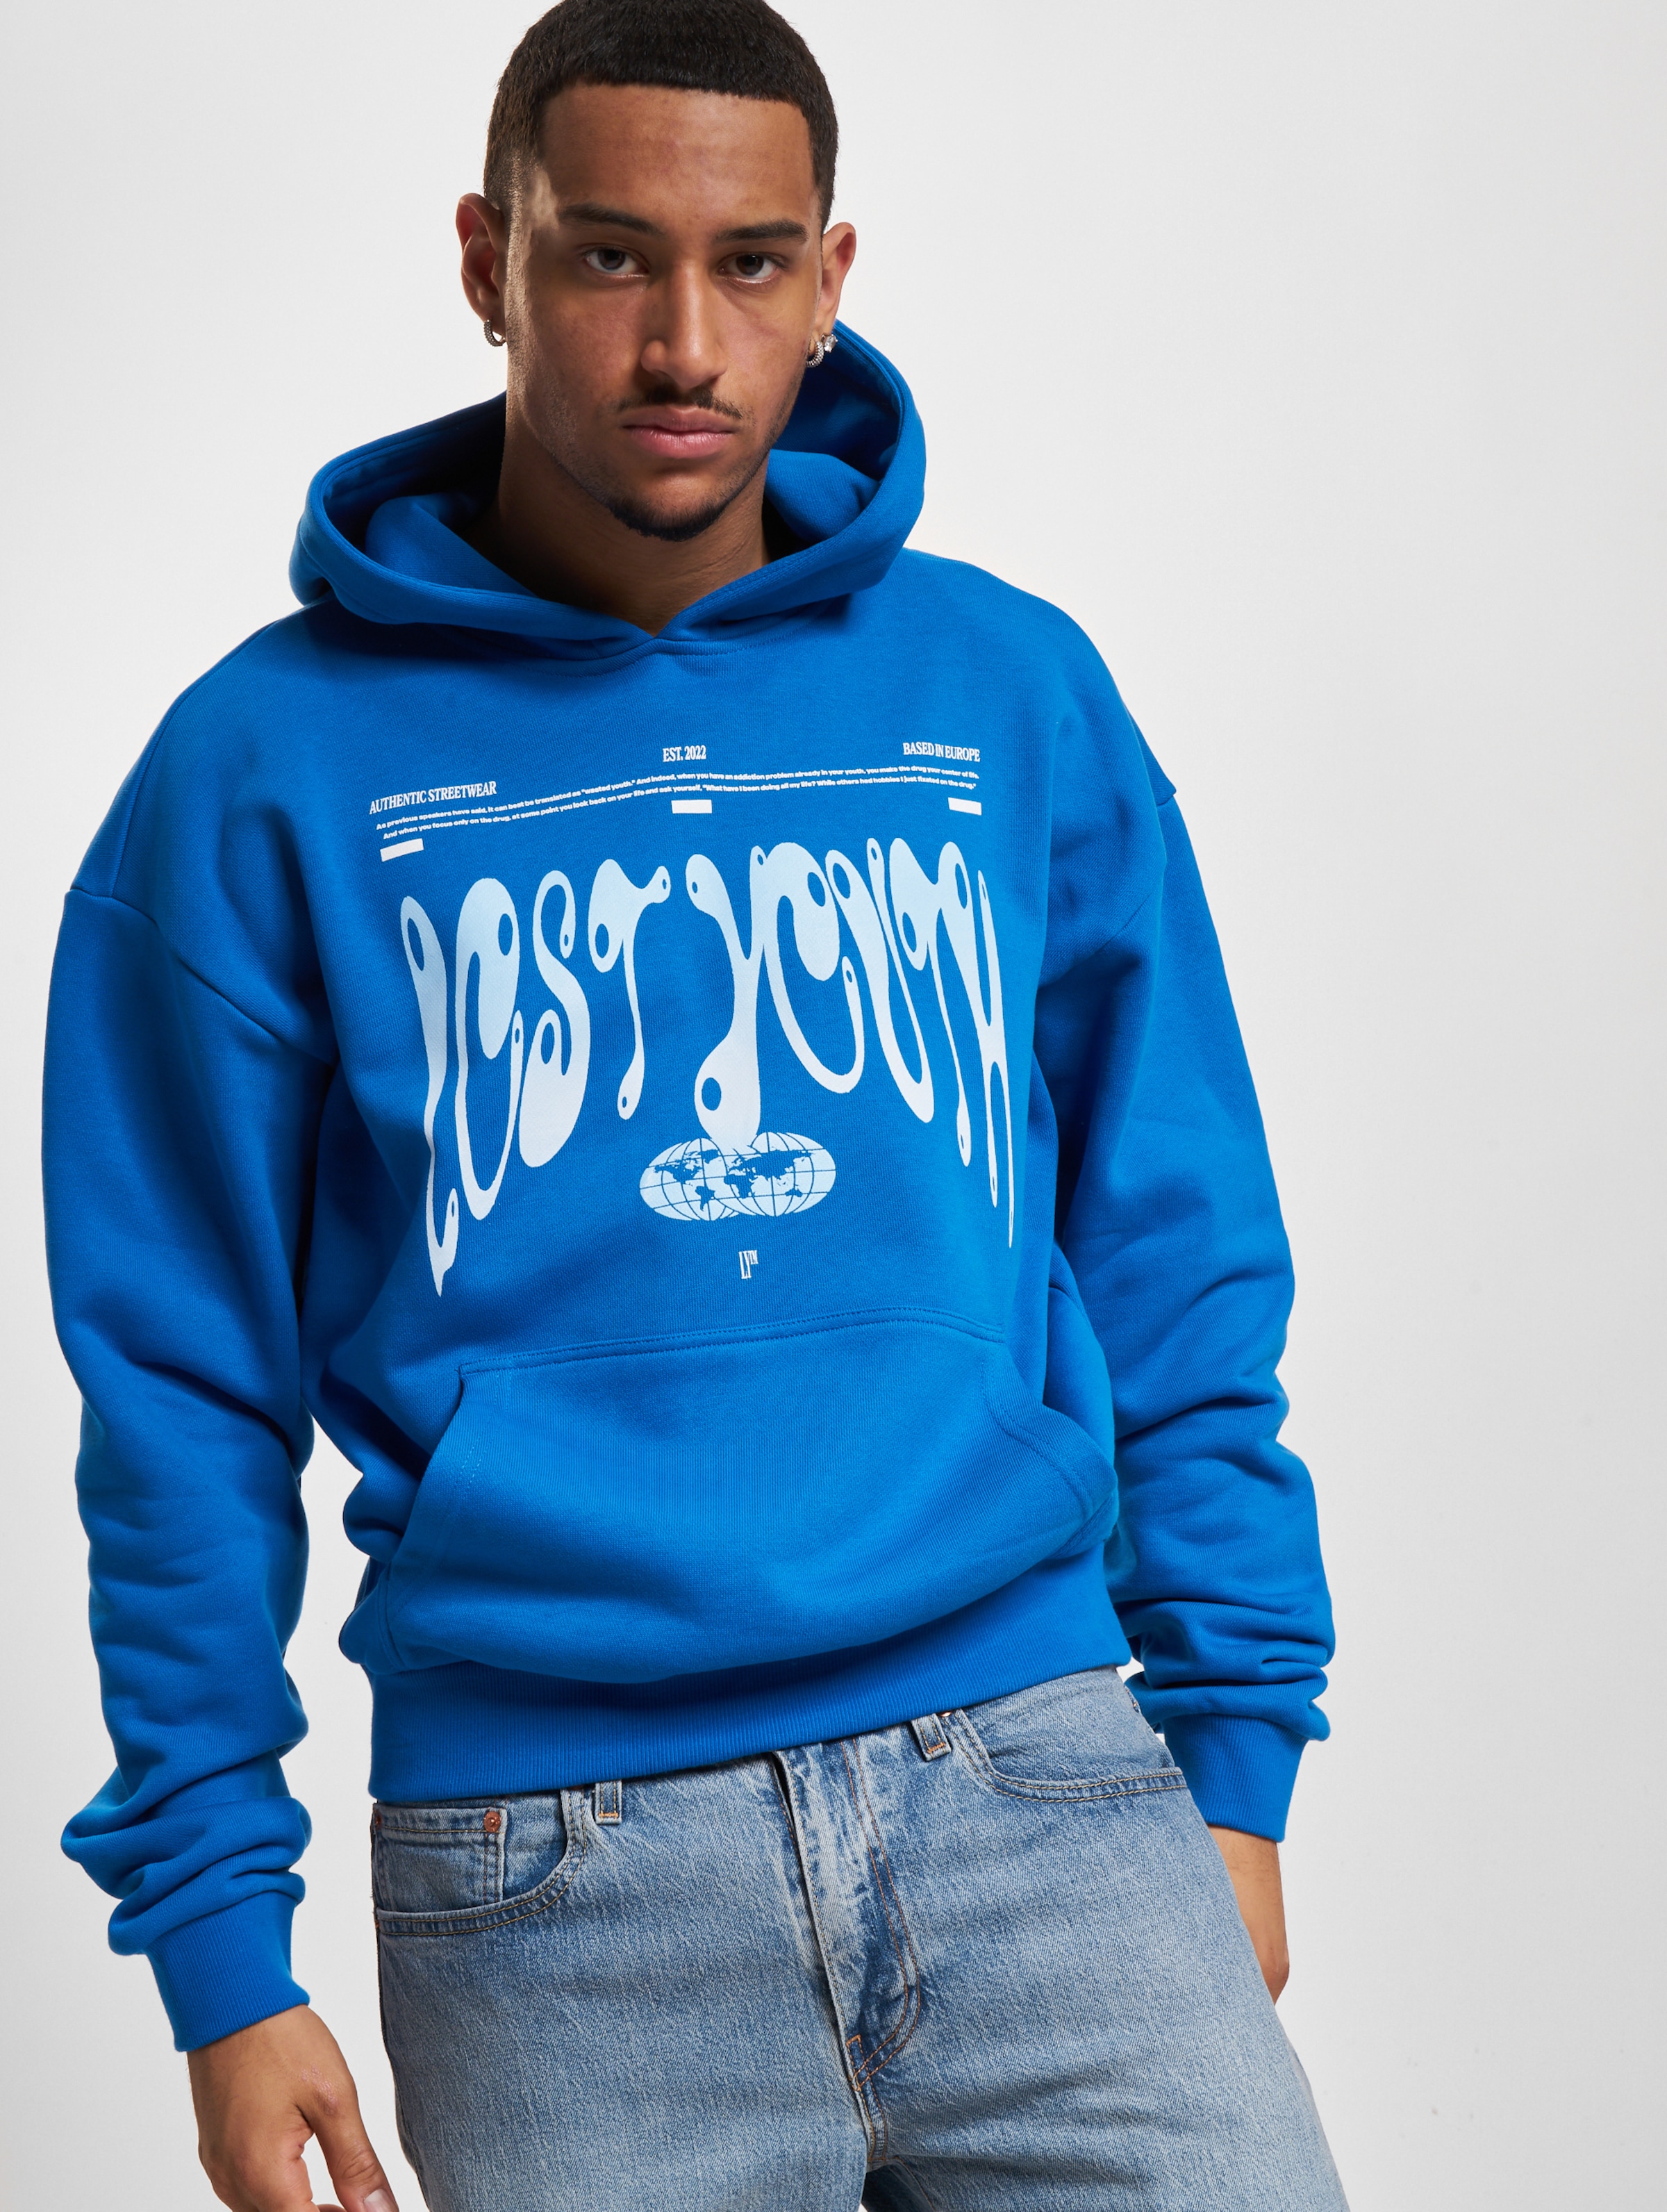 Lost Youth LY HOODY - AUTHENTIC Mannen op kleur blauw, Maat 3XL